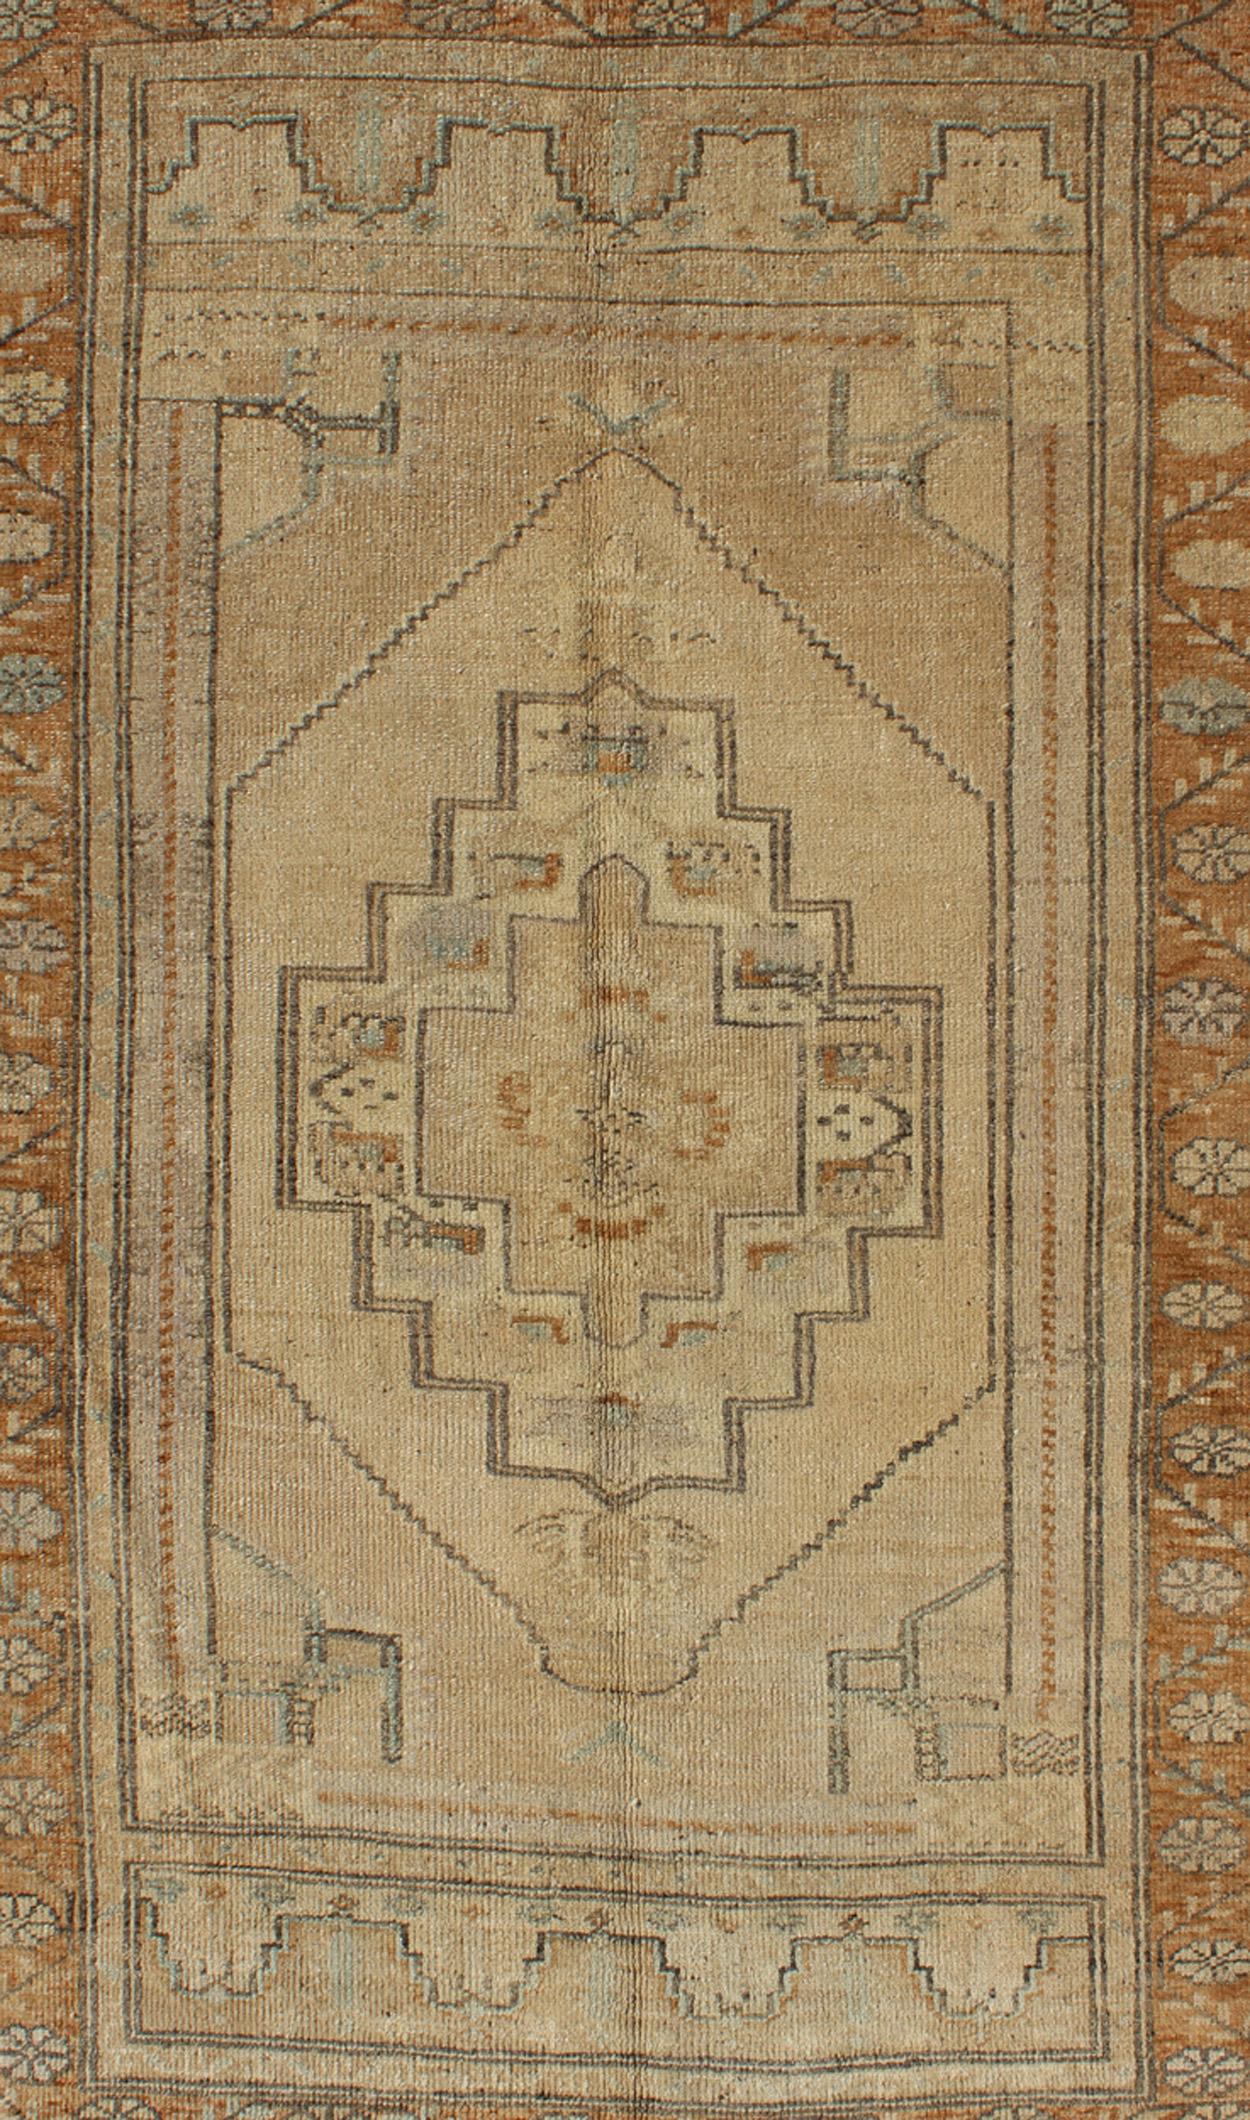 Vintage Turkish Oushak Rug with Medallion Design in Camel, Taupe, Green & Brown In Good Condition For Sale In Atlanta, GA